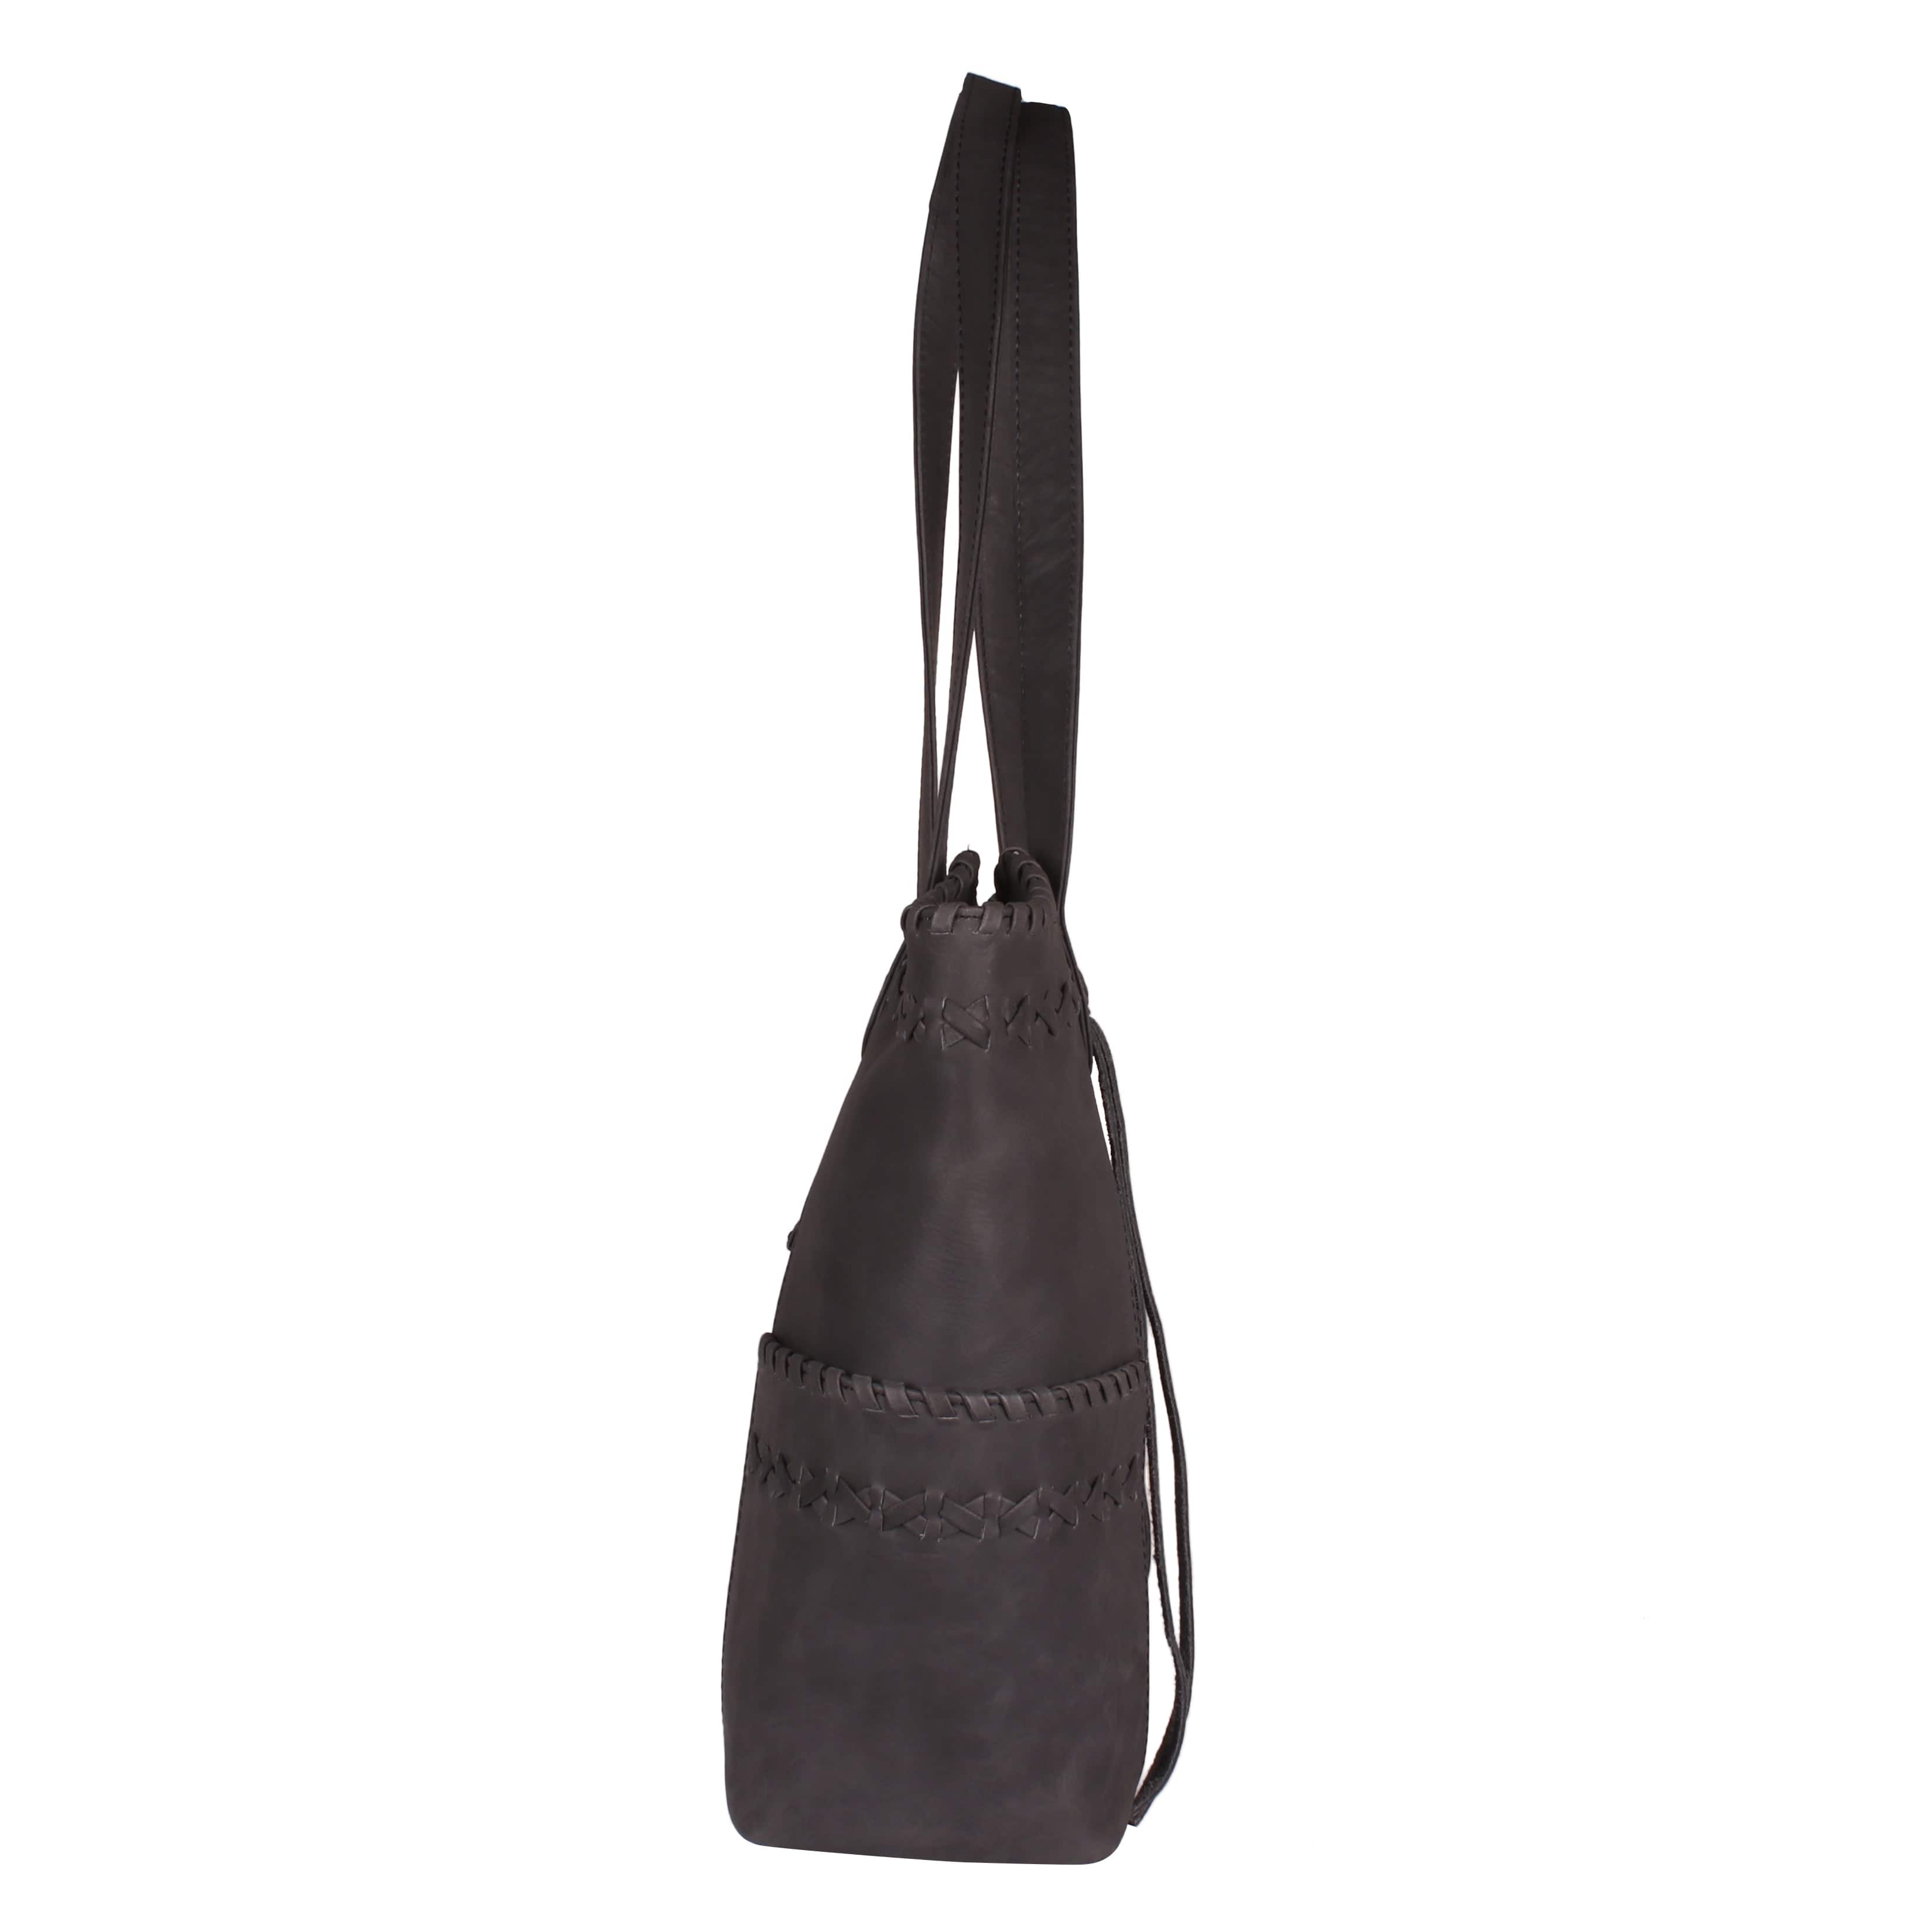 Concealed Carry Kendall Leather Tote -  Lady Conceal -  Women conceal carry purse for pistol -  Designer Luxury Ella Tote Carry Handbag -  YKK Locking Zippers and Universal Holster -  Unique Hide Handbag Gun and Pistol Bag -  Designer Luxury Kendall Leather Carry Handbag -  carry Handbag for gun carry -  Unique Ella Tote gun Handbag - 	 concealed carry gun Handbag -  concealed carry gun Handbag with locking zipper -  concealed carry Handbag for woman